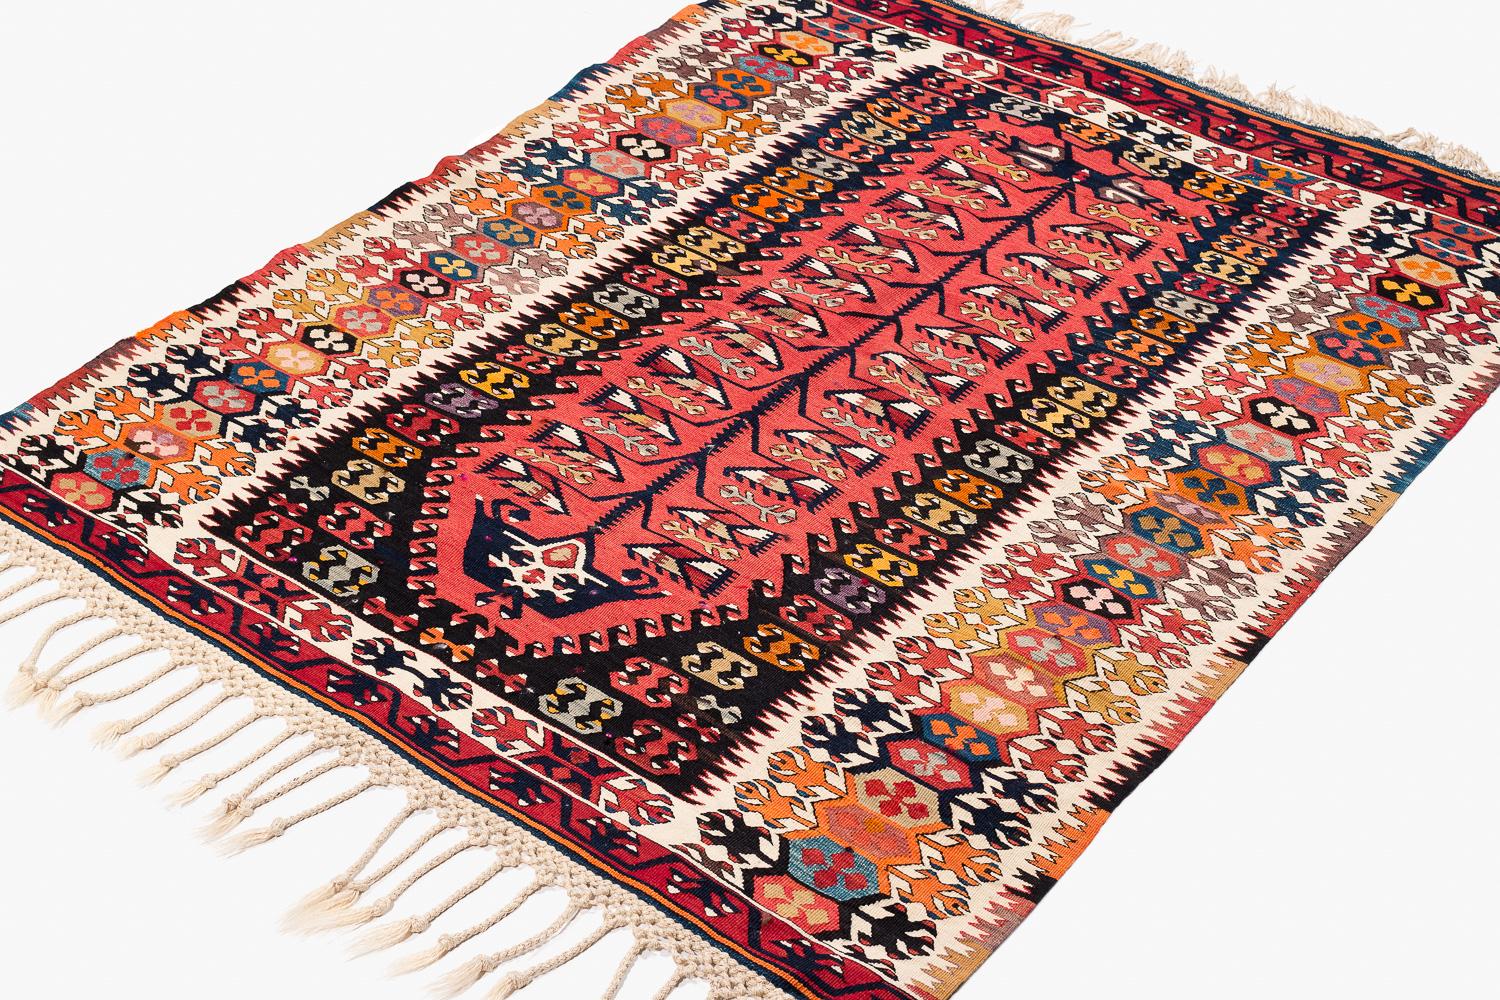 This prayer kilim is approximately 40-50 years old and was made with the highest quality materials. This rug is woven very tightly using Fine yarn and is stunning condition. It would be great either on the floor or as a wall hanging. Measures: